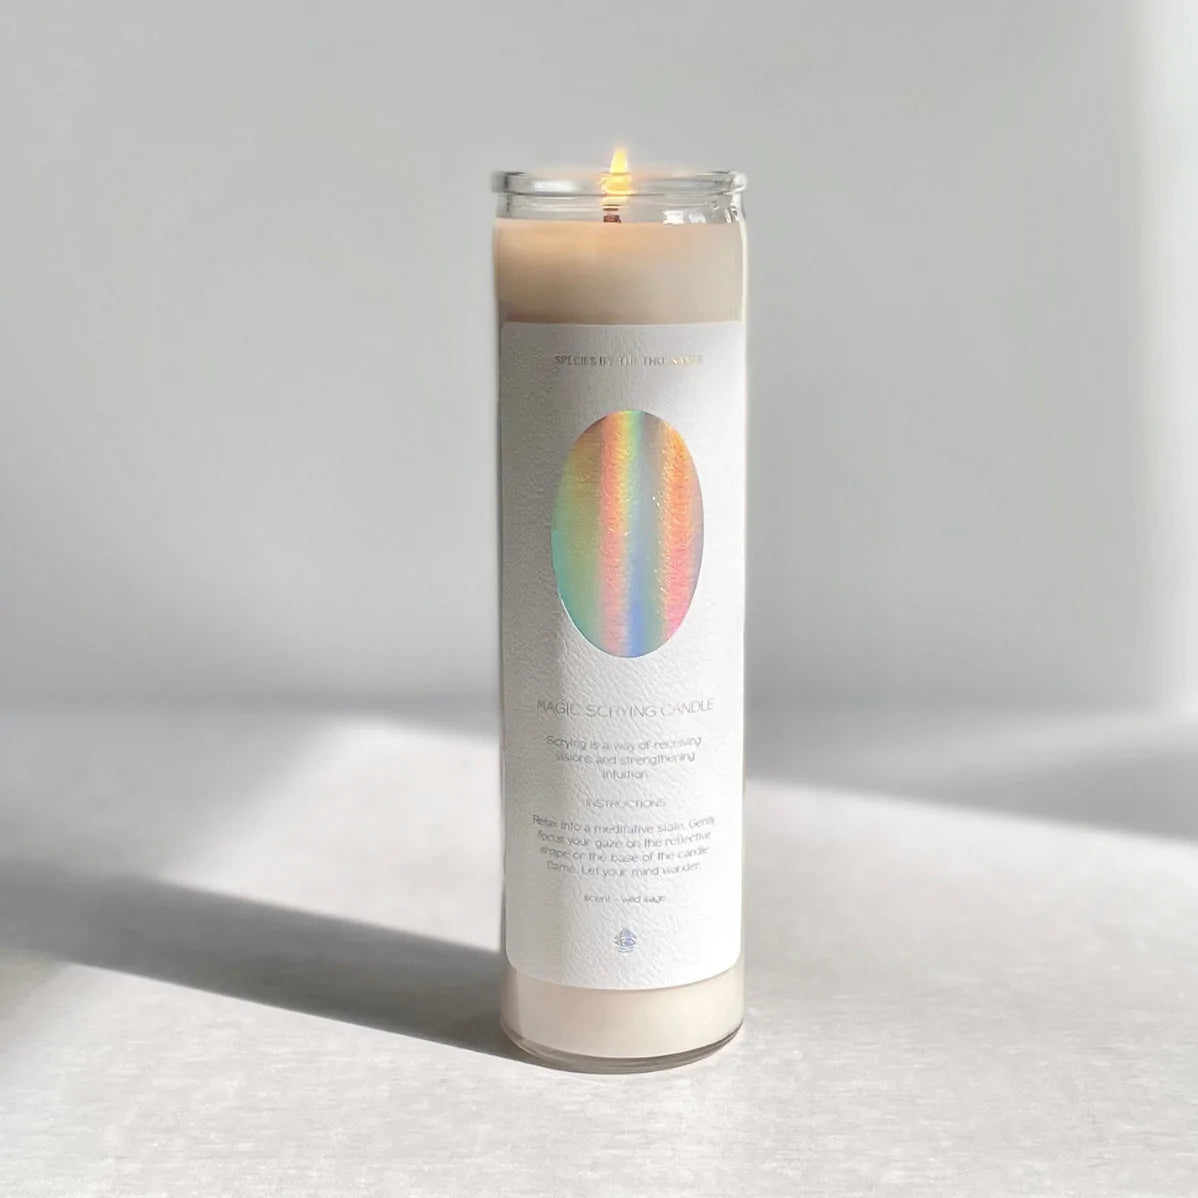 MAGIC SCRYING HANDCRAFTED SOY CANDLE